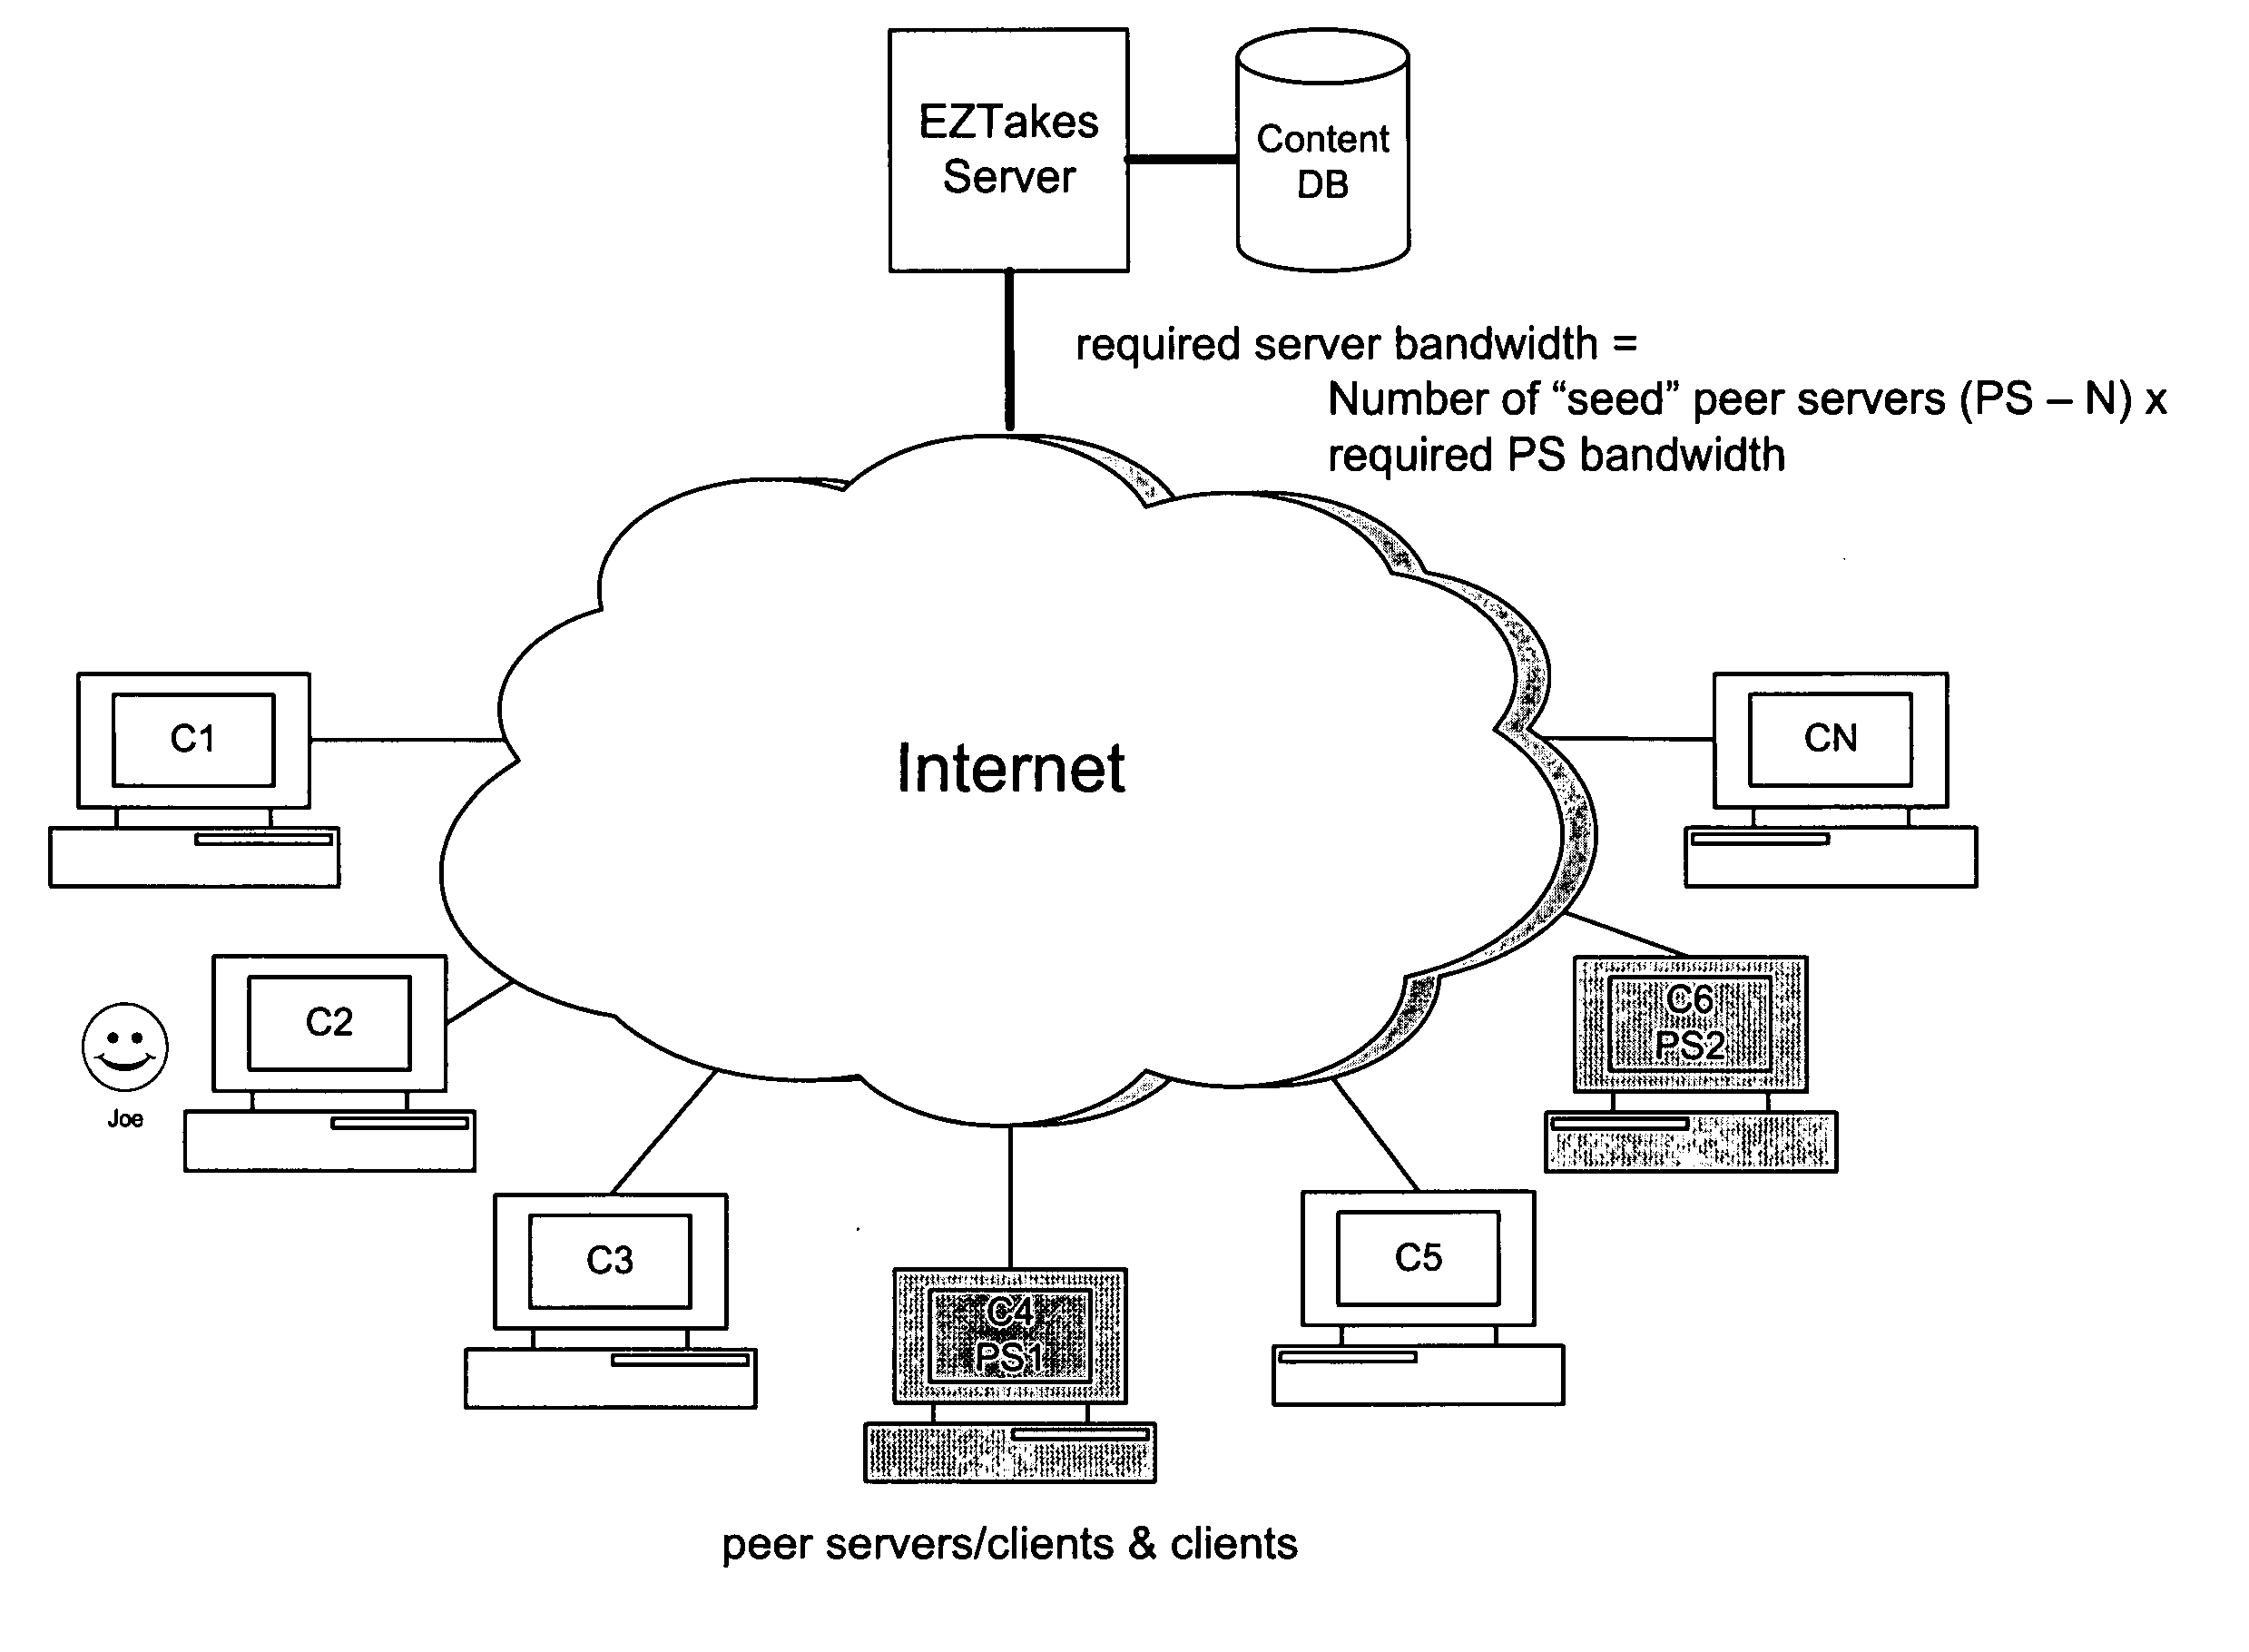 Content distribution using CD/DVD burners, high speed interconnects, and a burn and return policy